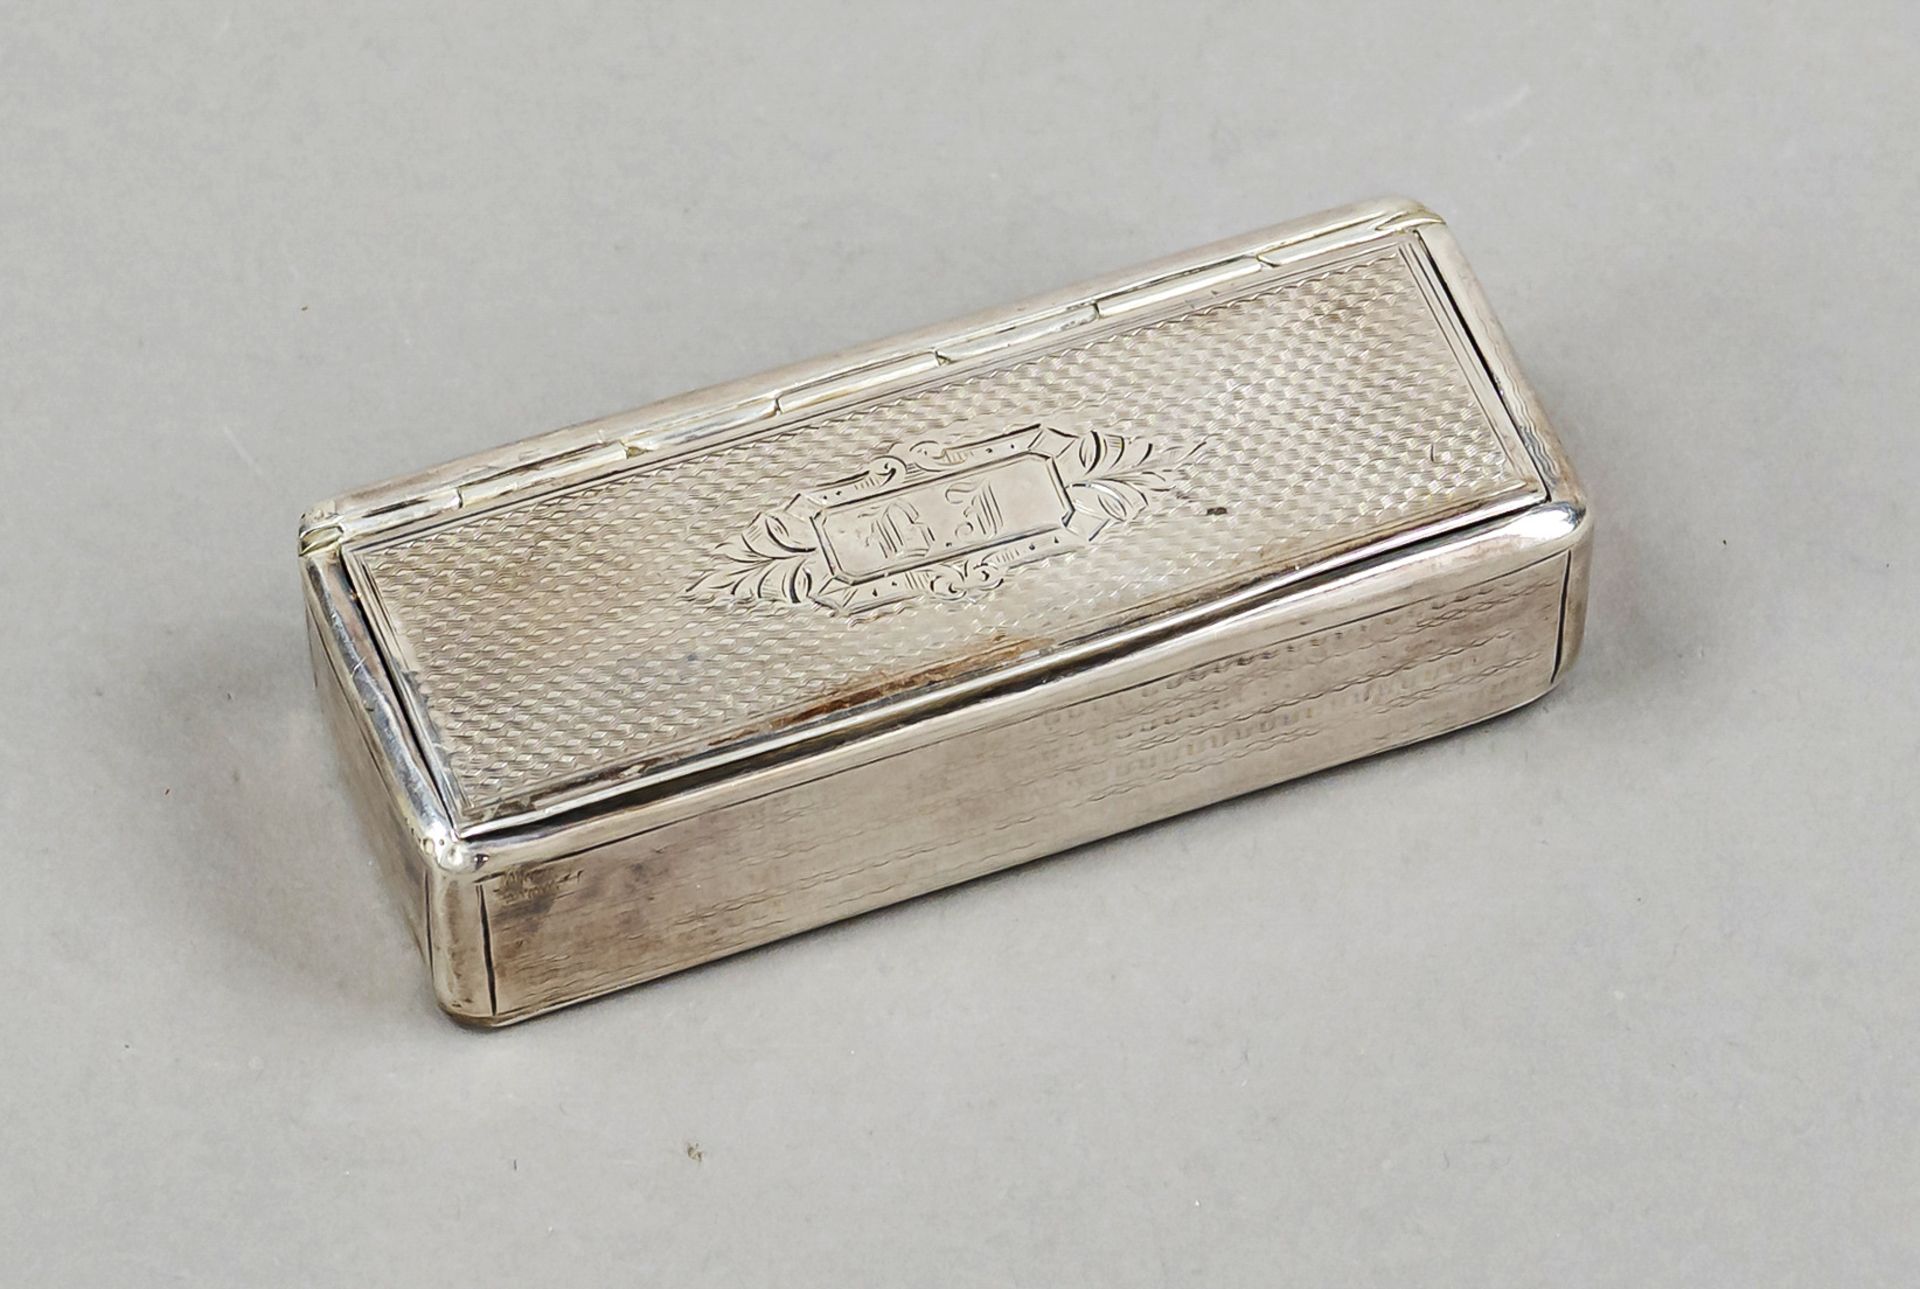 Rectangular tabatiere, France, c. 1900, MZ unmarked, hallmarked silver, smooth shape, flat hinged